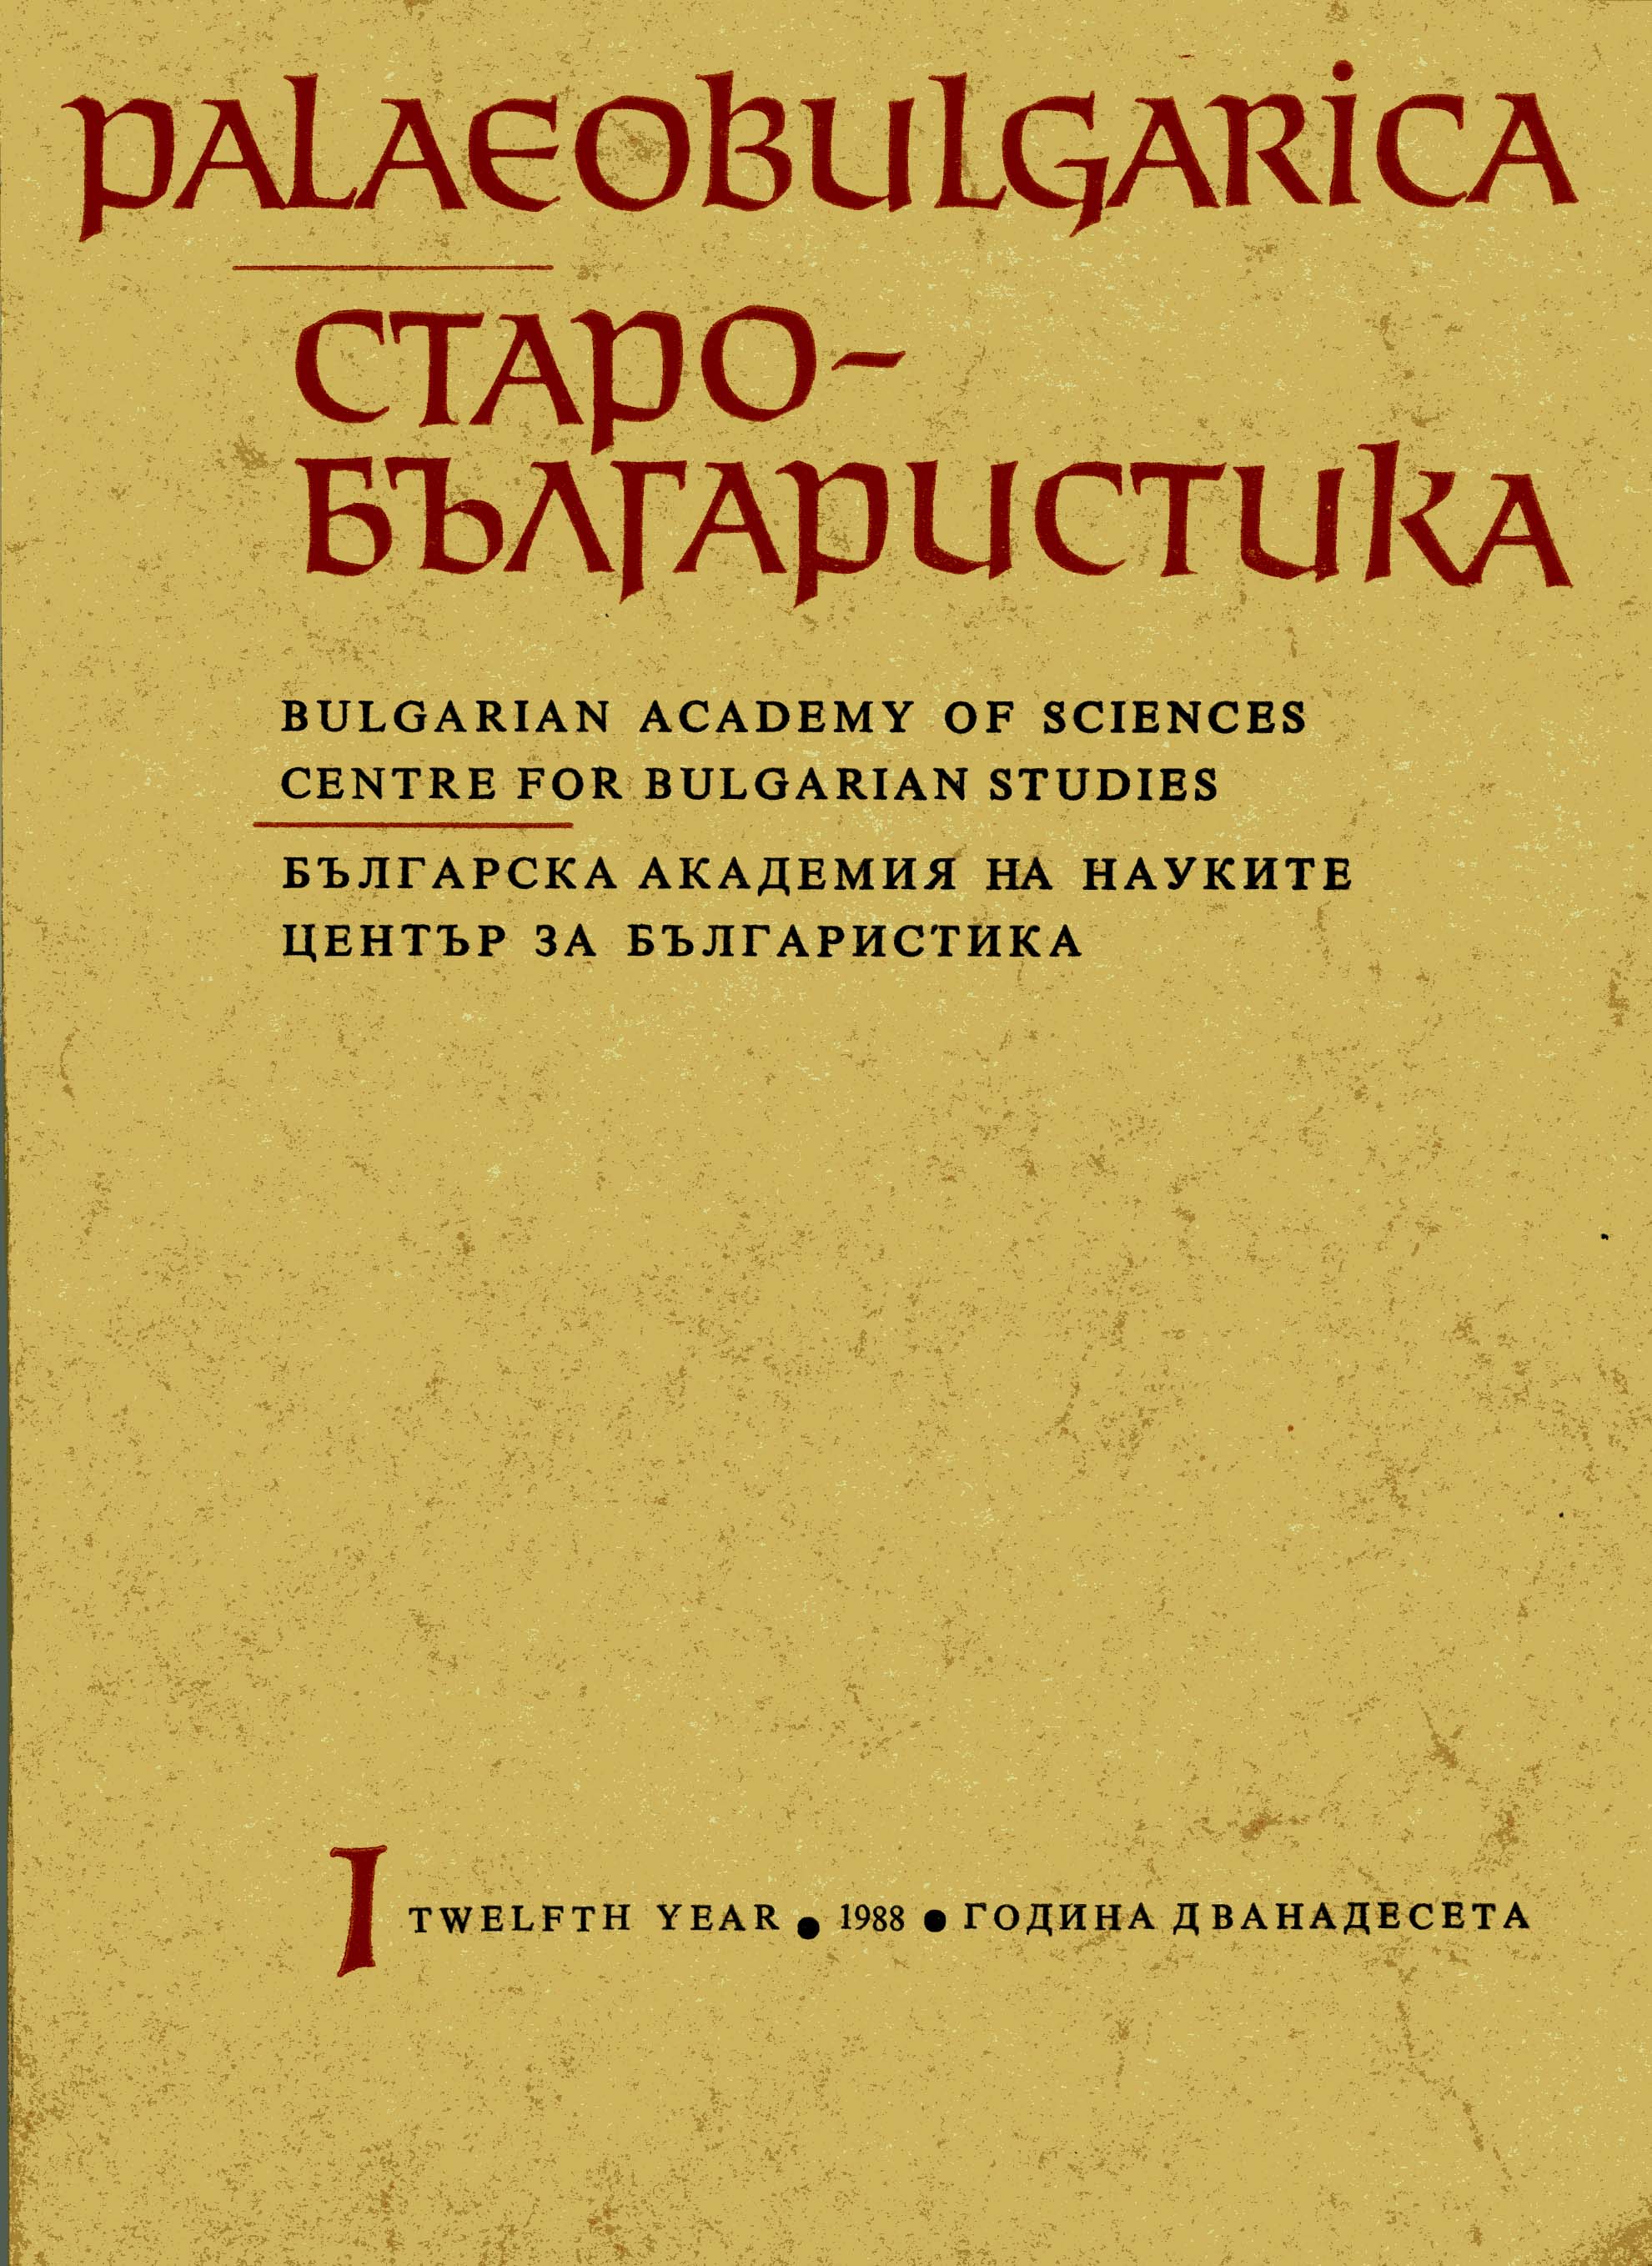 A Book That is a Contribution to Publishing and Research Activities Cover Image